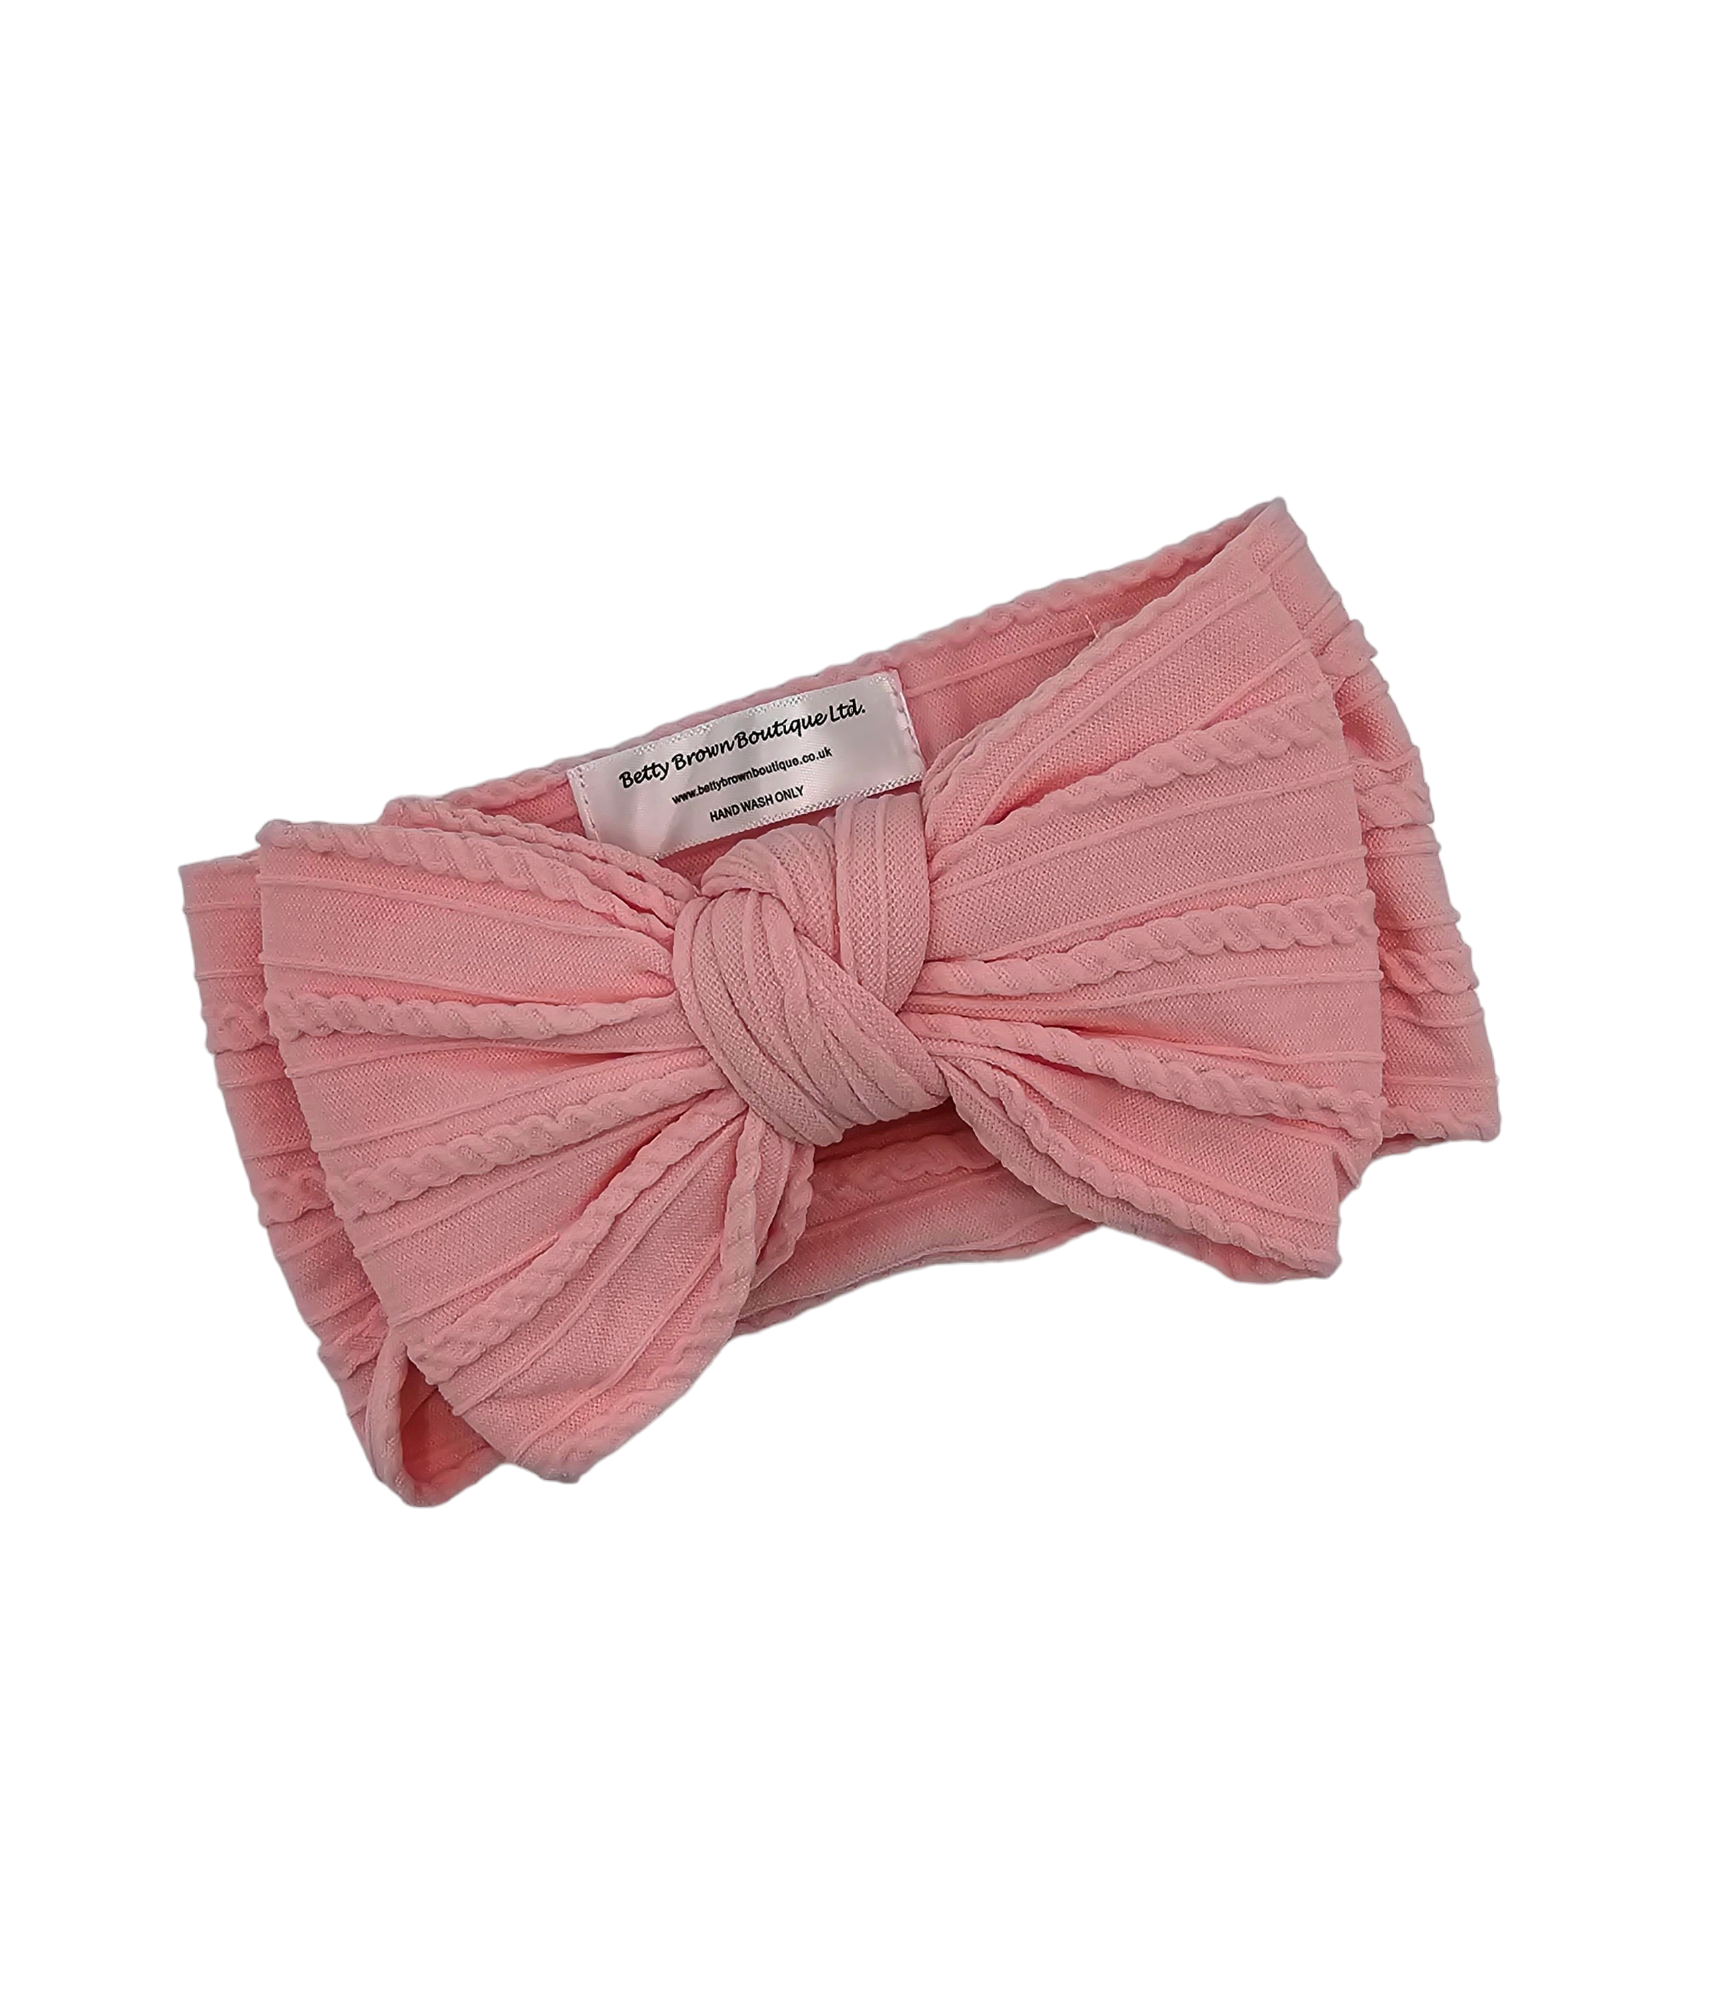 Flamingo Pink Larger Bow Cable Knit Headwrap - Betty Brown Boutique Ltd